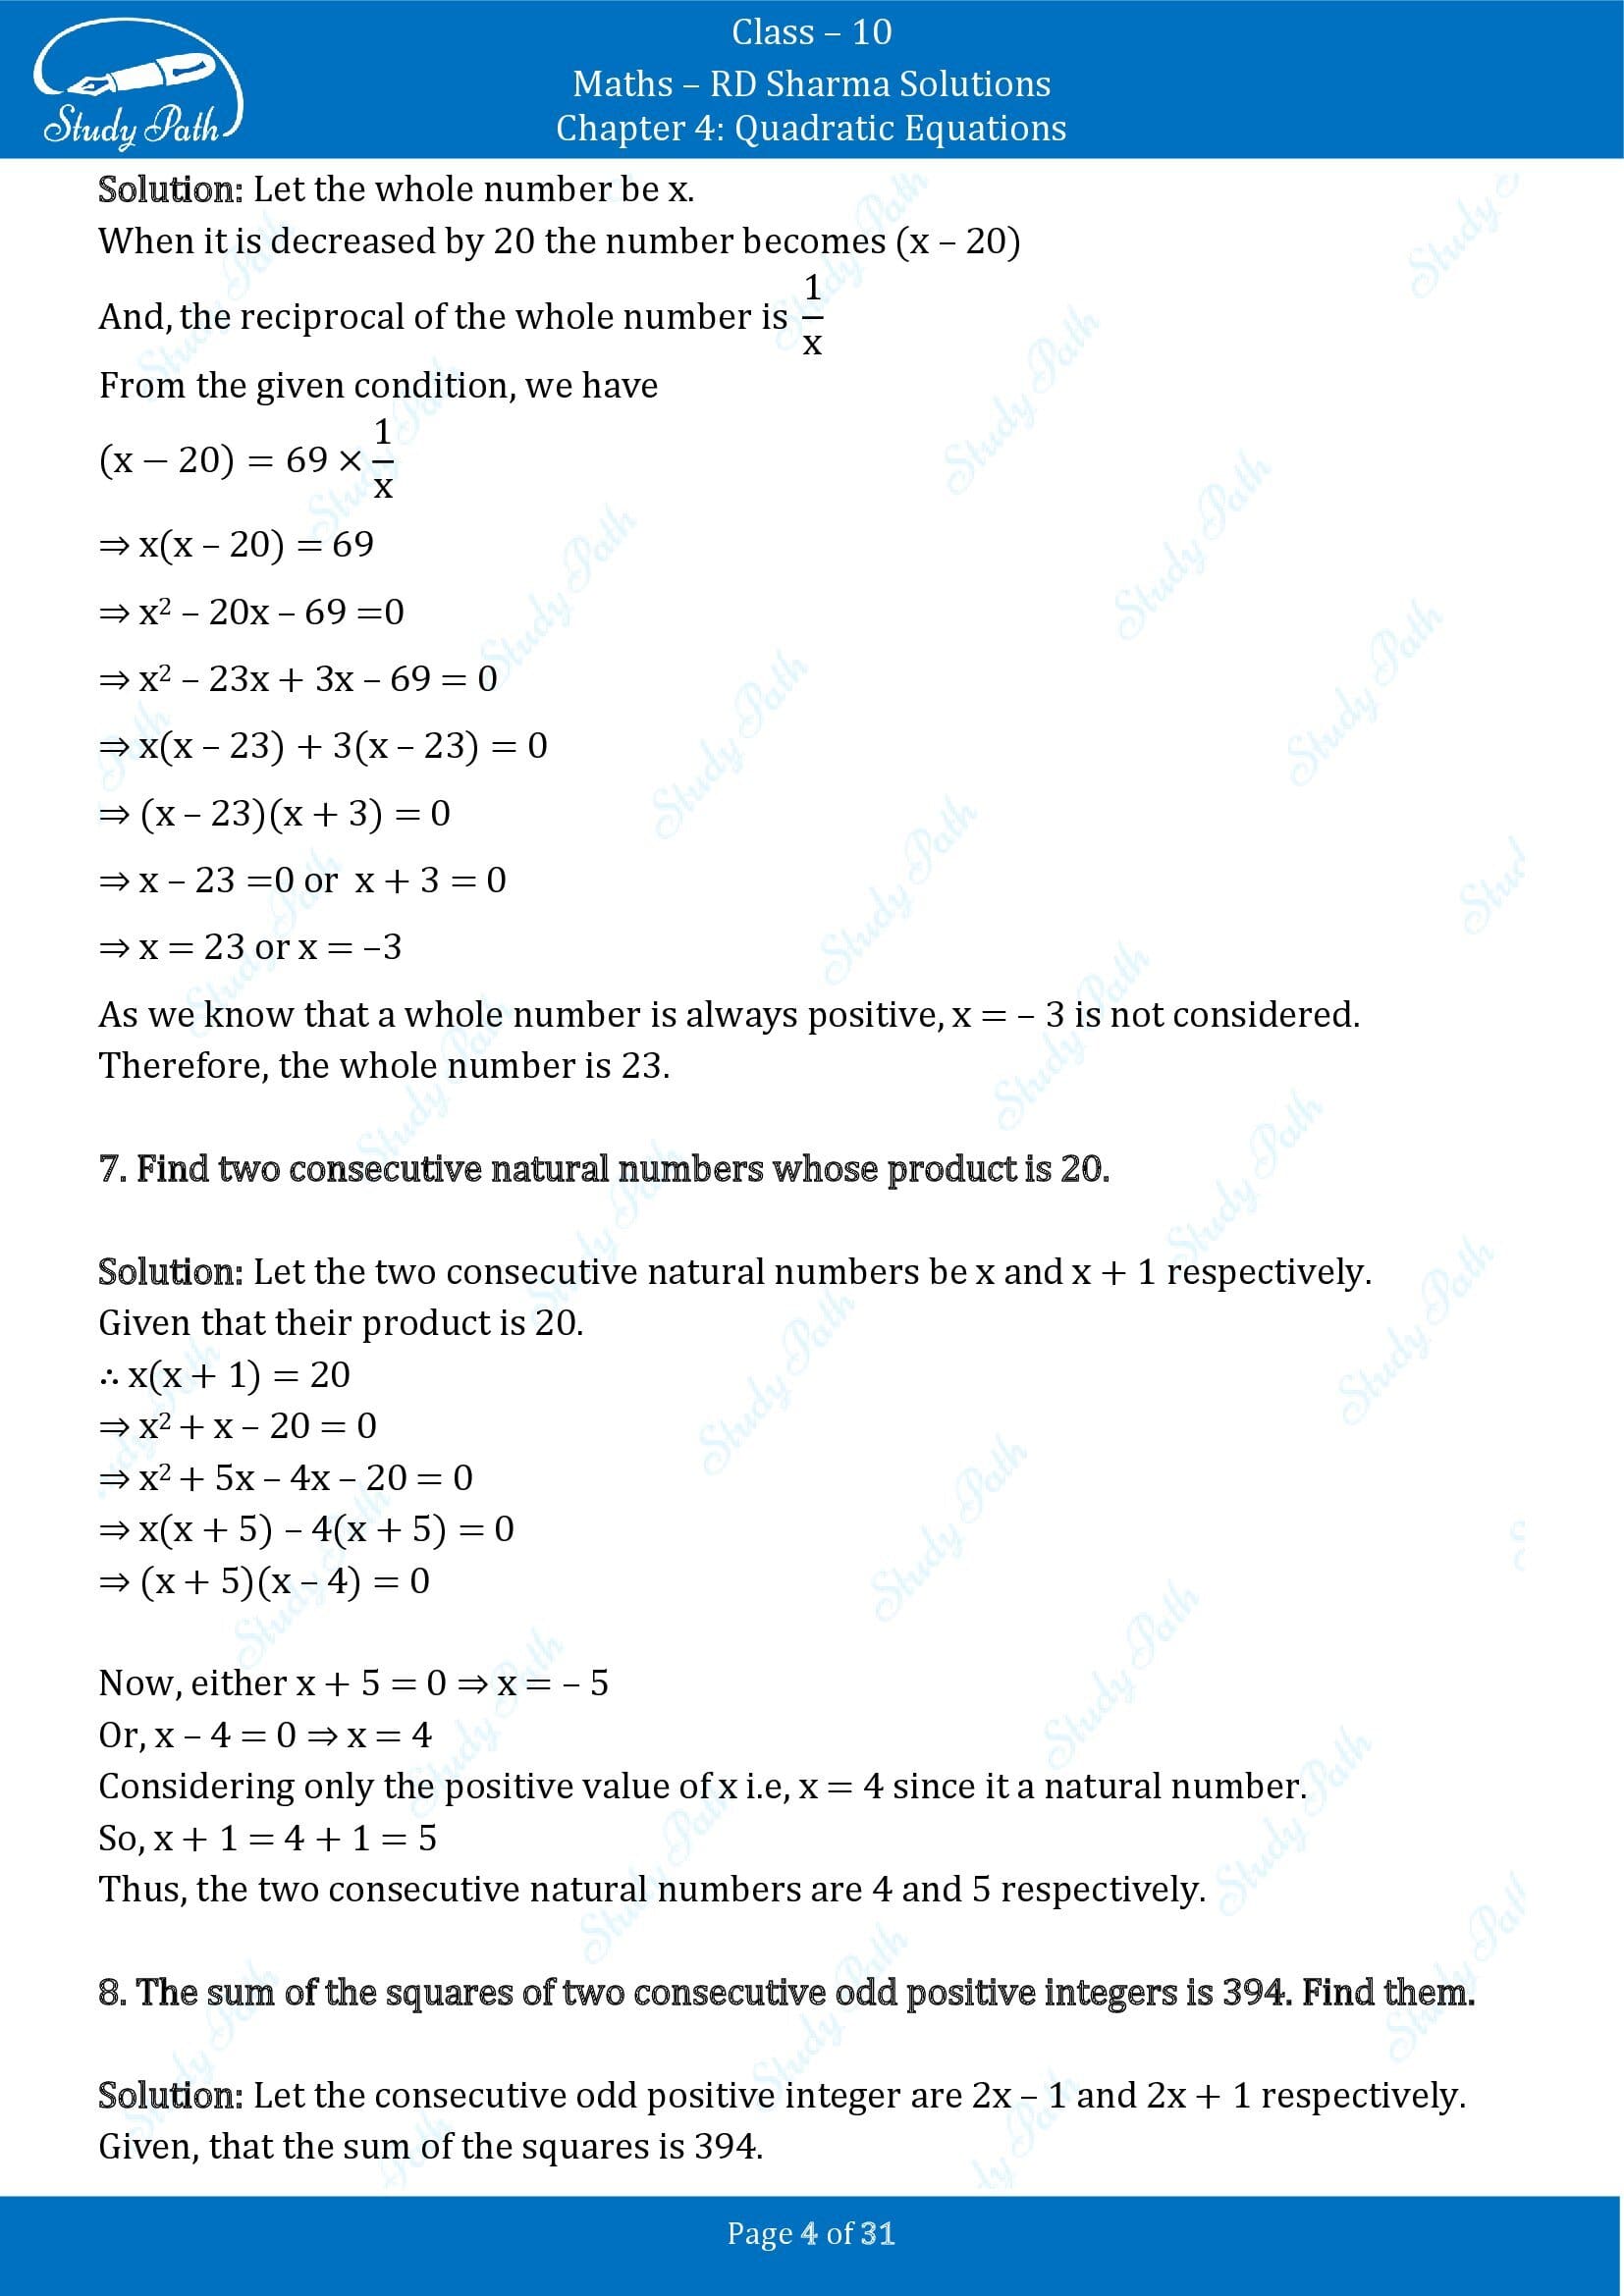 RD Sharma Solutions Class 10 Chapter 4 Quadratic Equations Exercise 4.7 00004